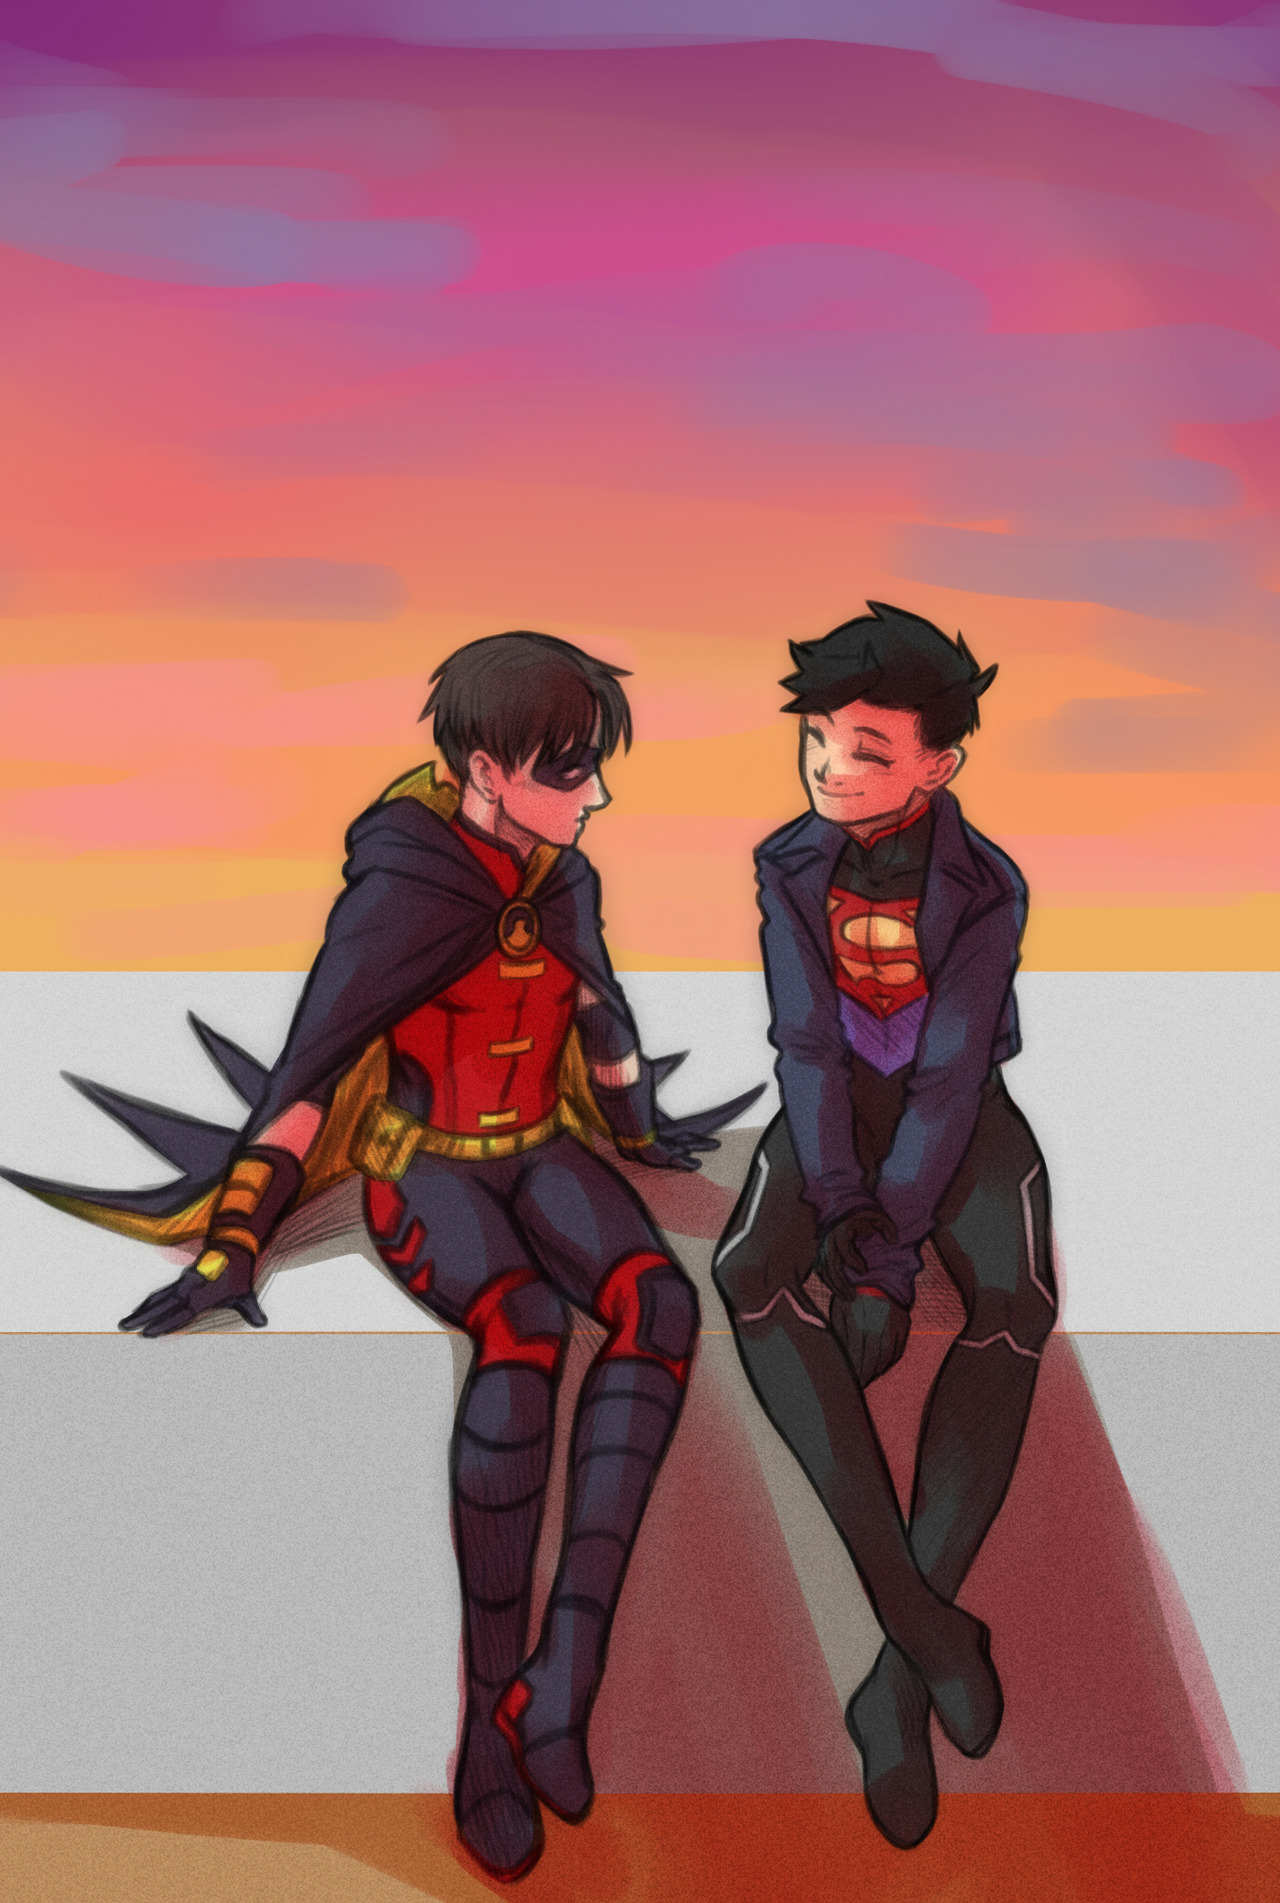 Reign of the Supermen Art by Ryrijp